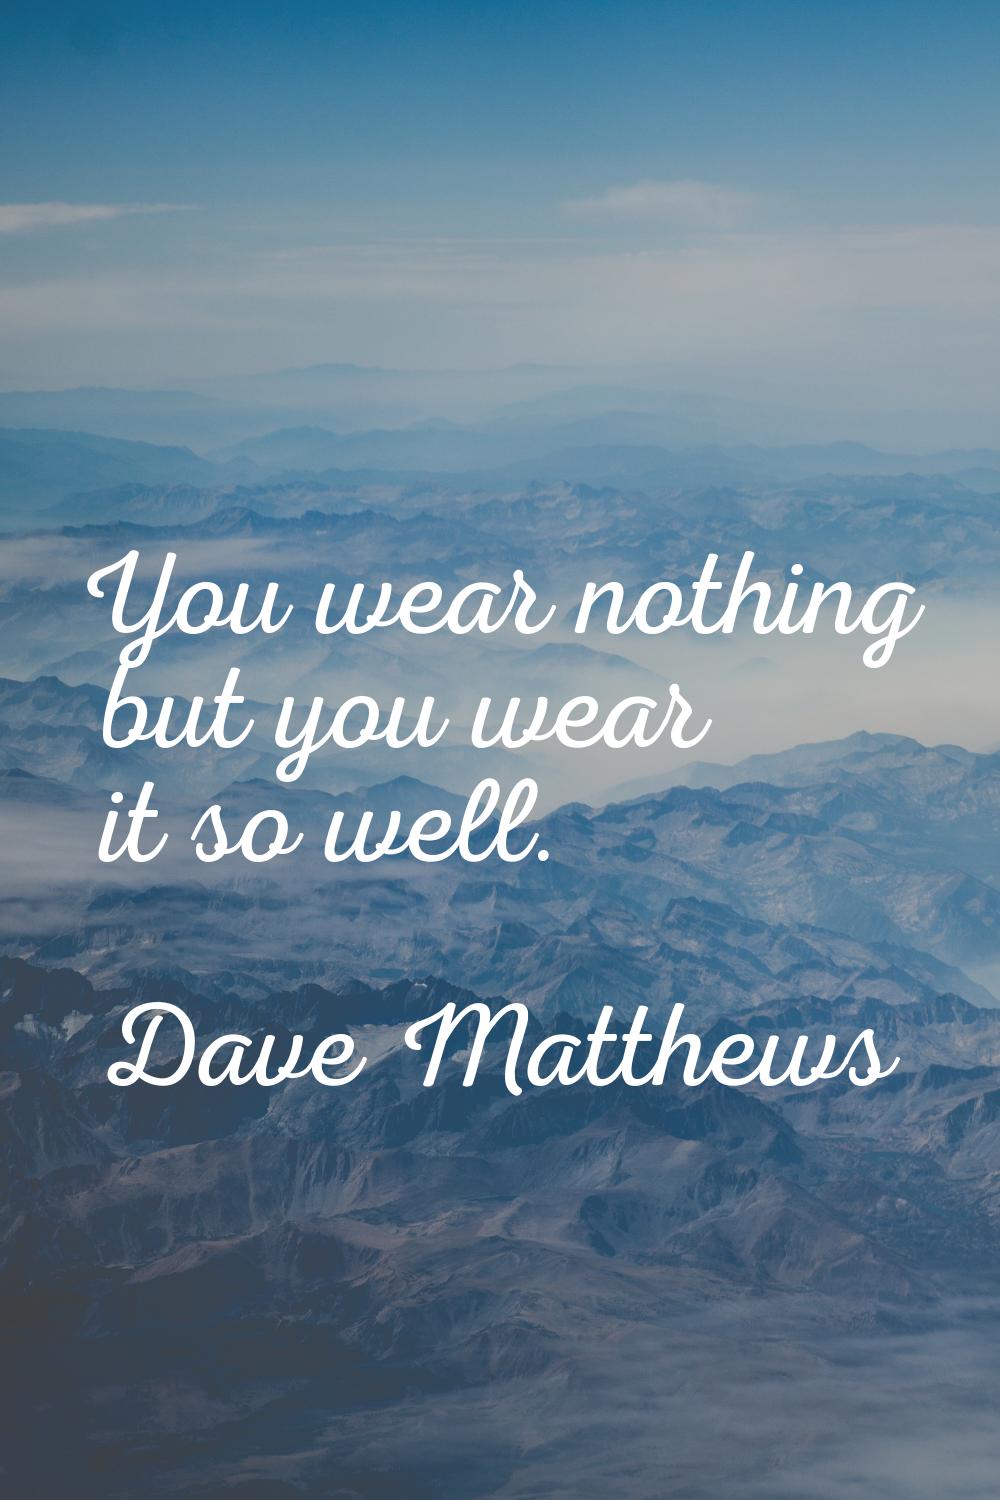 You wear nothing but you wear it so well.